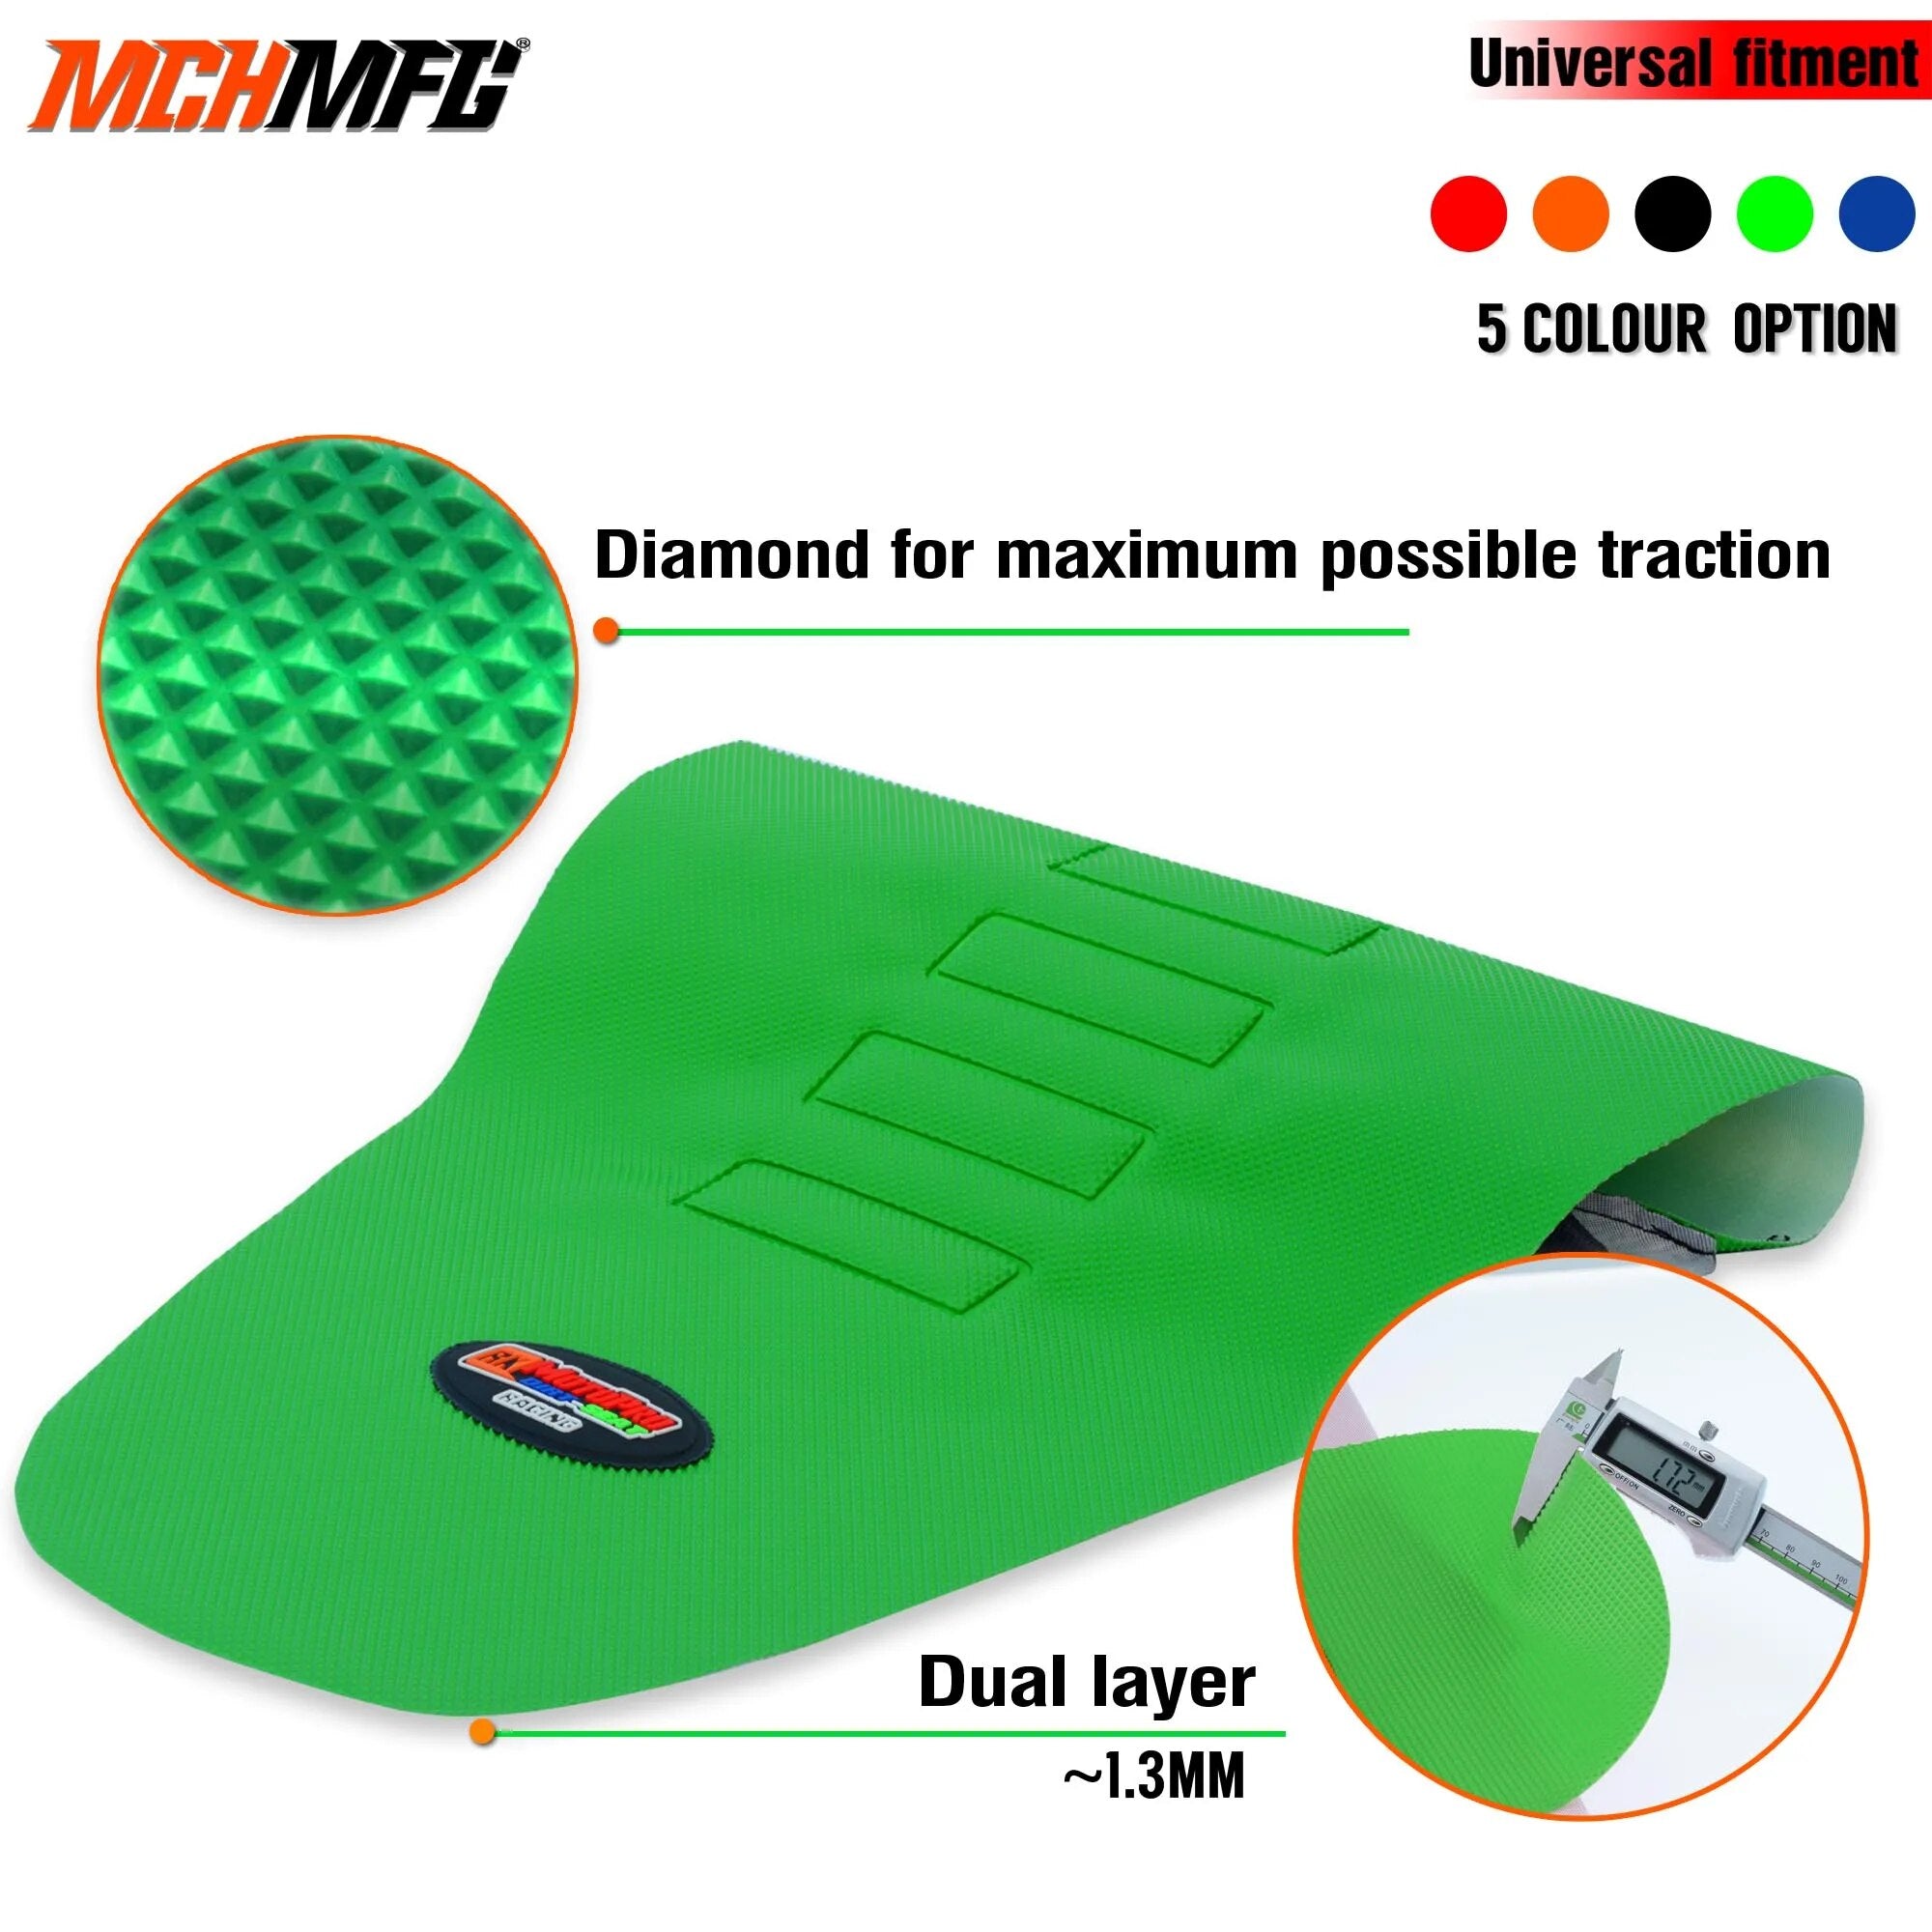 Motorcycle Seat Cover Non-Slip Thick Particles Suitable For CRF YZF WR RMZ KAYO T6 BSE 125 150 250 300 350 450